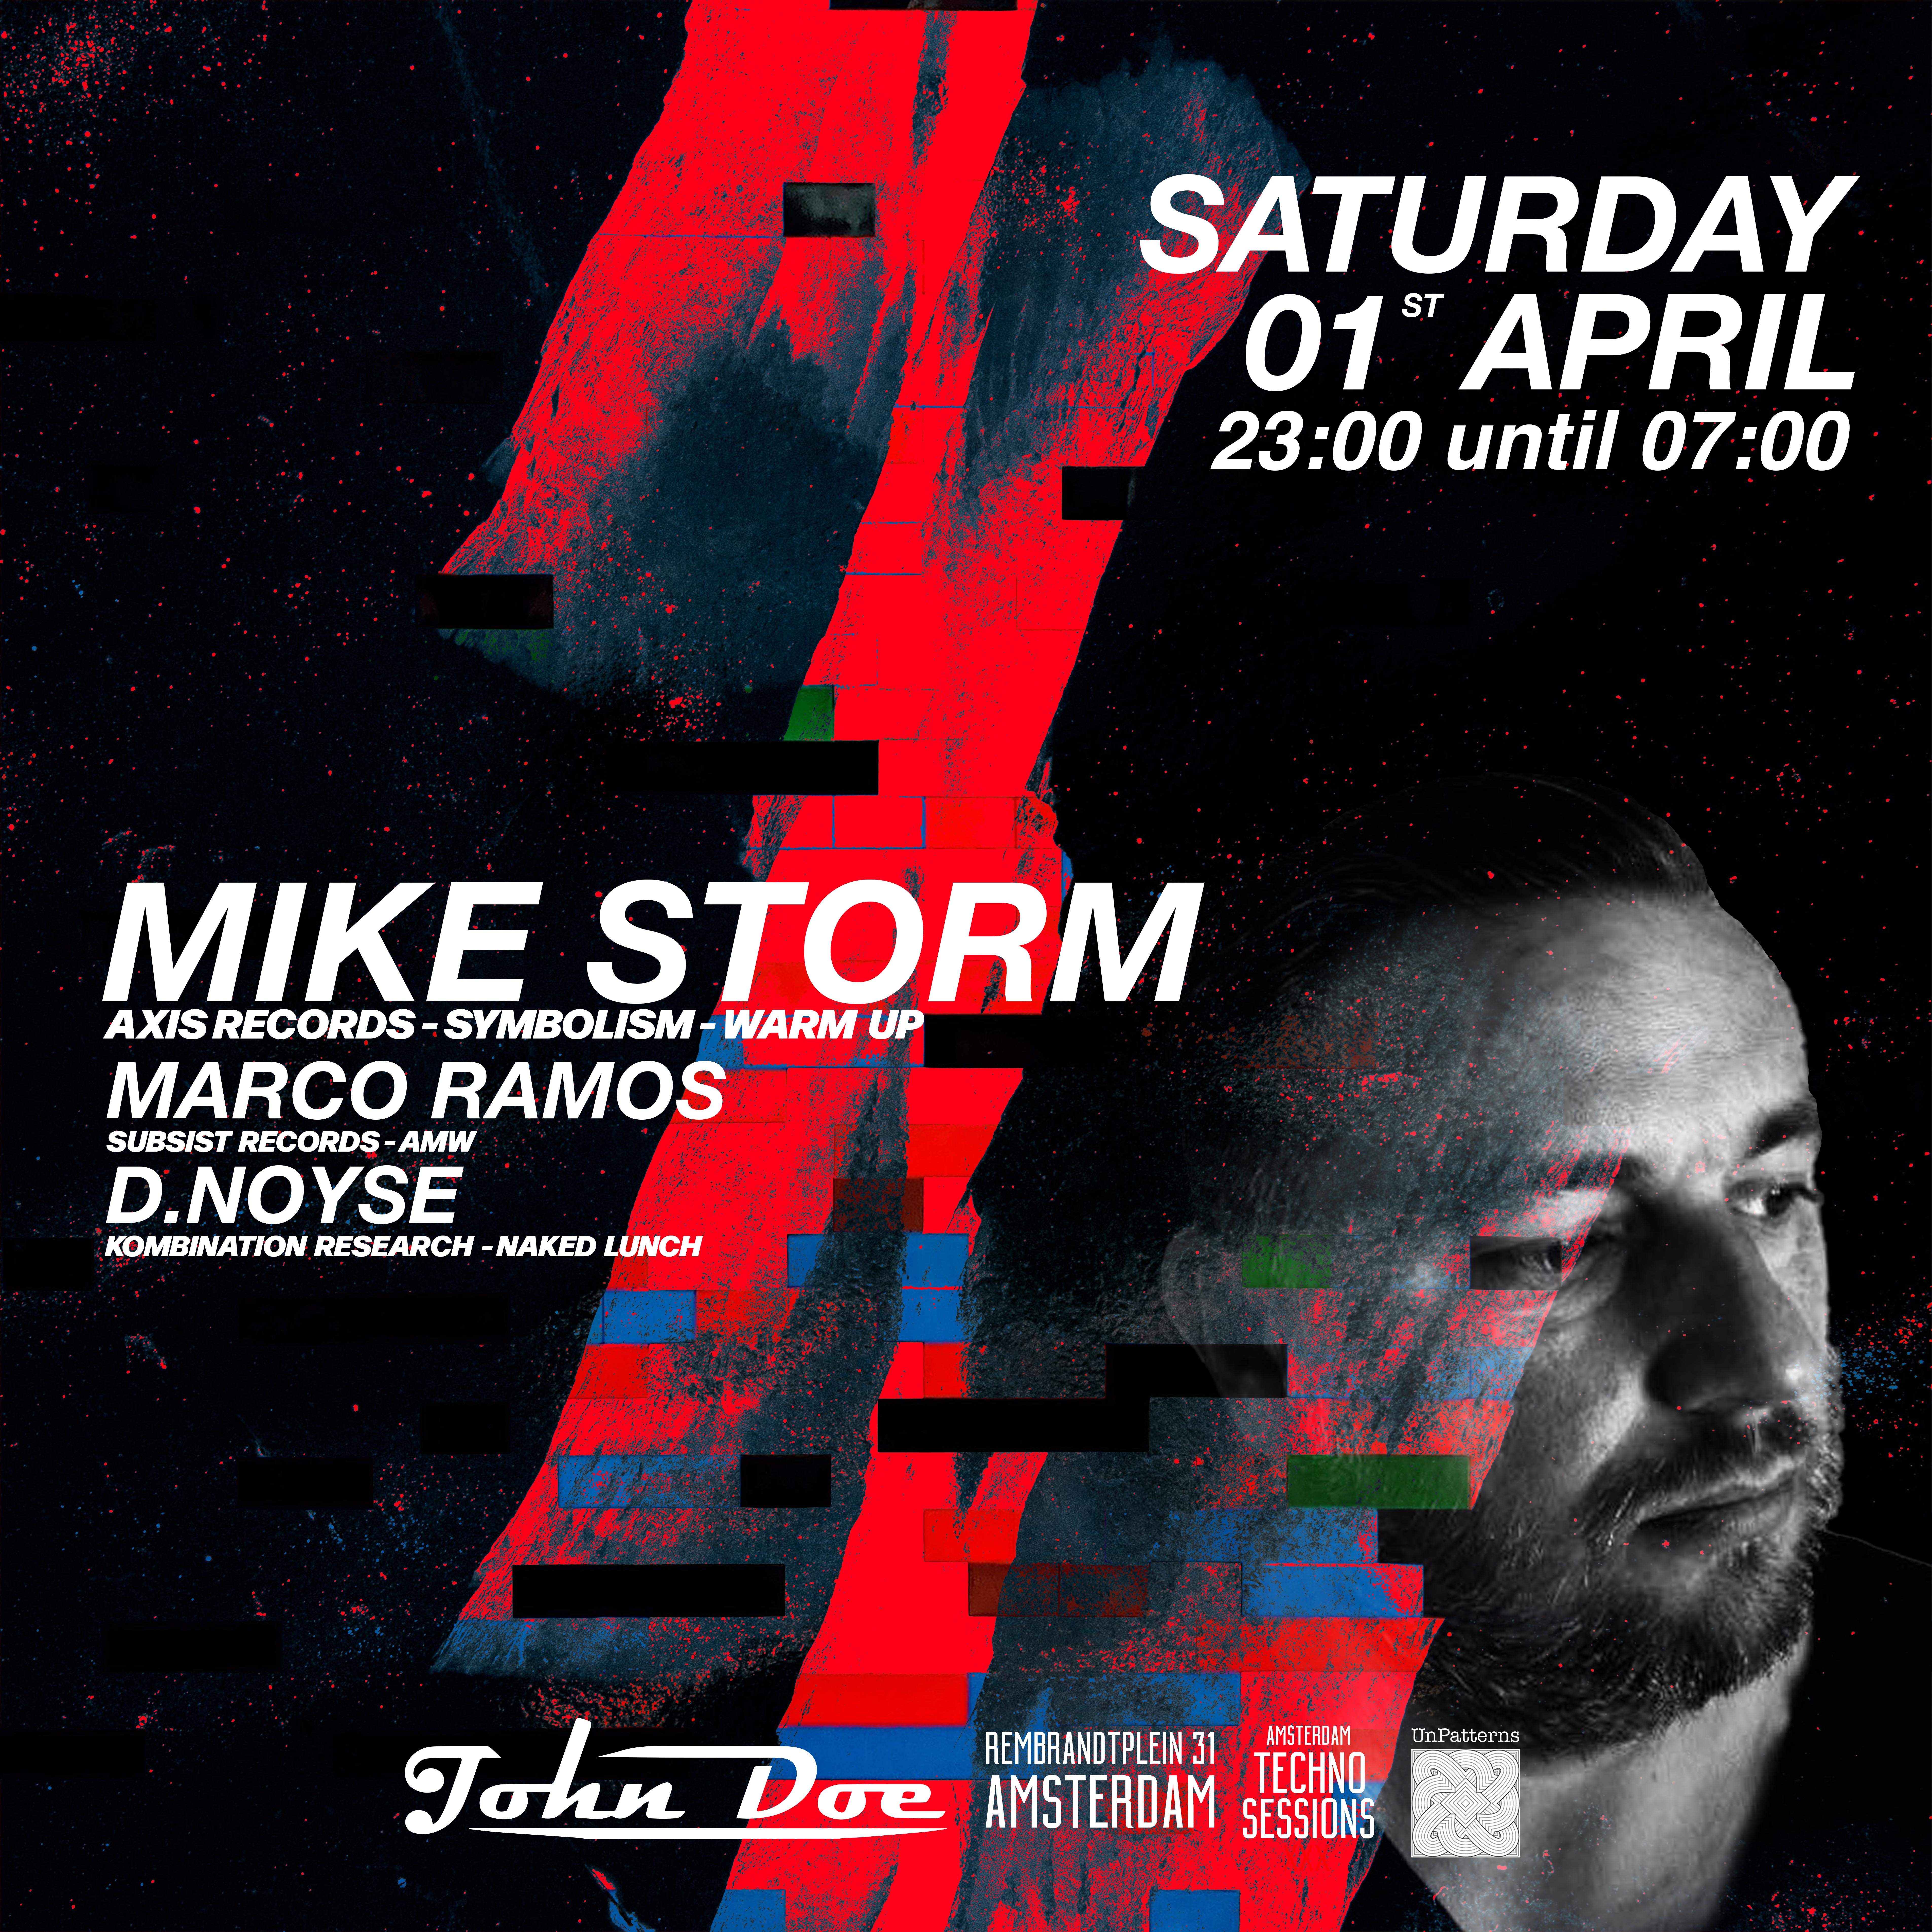 Amsterdam Techno Sessions with Mike Storm (Axis Records, Symbolism, Warm Up Recordings) - フライヤー裏